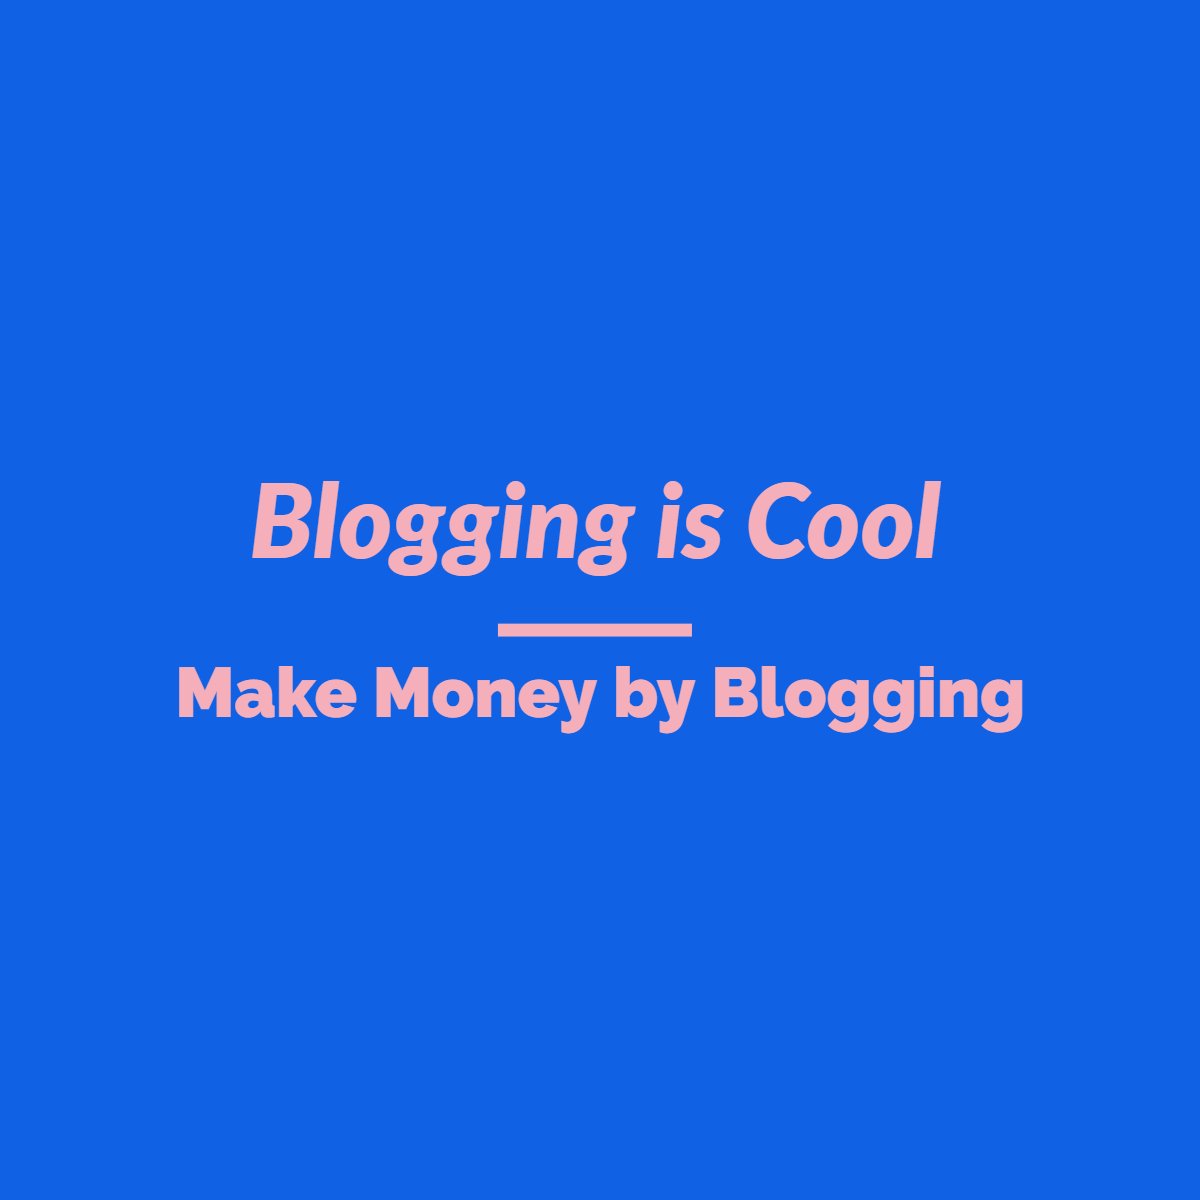 Bloggingiscool.com Using Headings Hierarchy on Your Blog in a Logical Manner